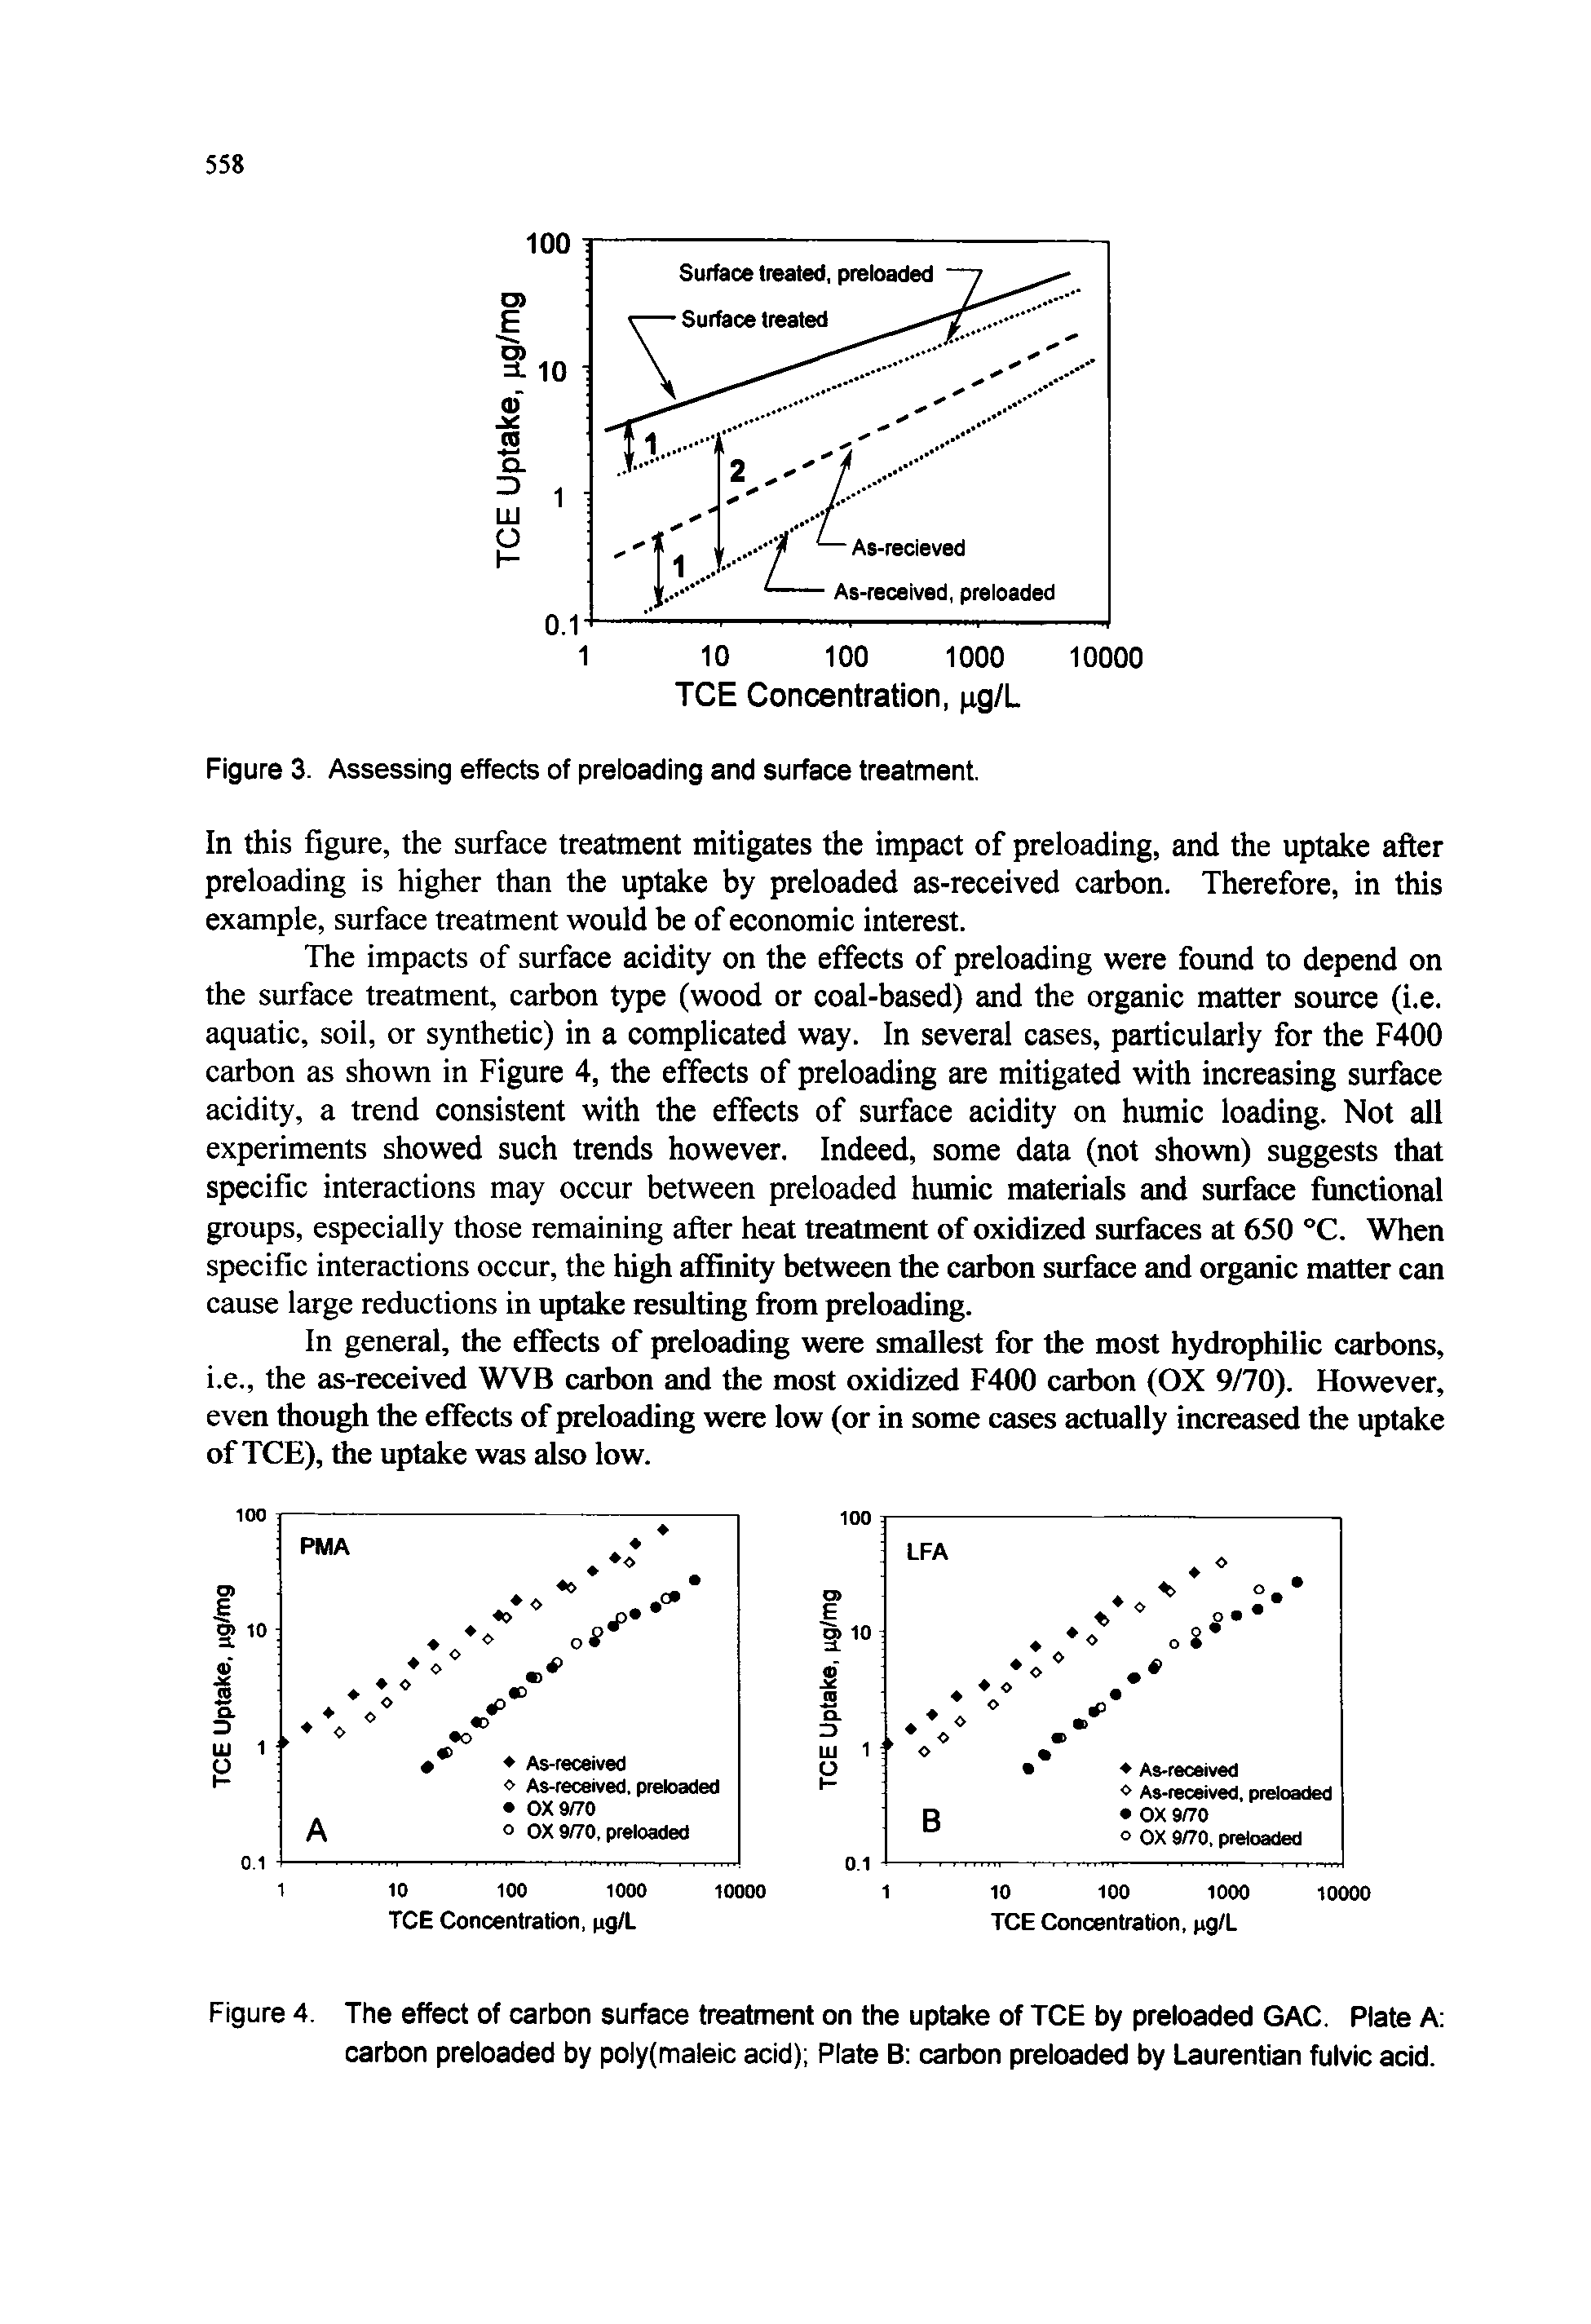 Figure 4. The effect of carbon surface treatment on the uptake of TCE by preloaded GAC. Plate A carbon preloaded by poly(maleic acid) Plate B carbon preloaded by Laurentian fulvic acid.